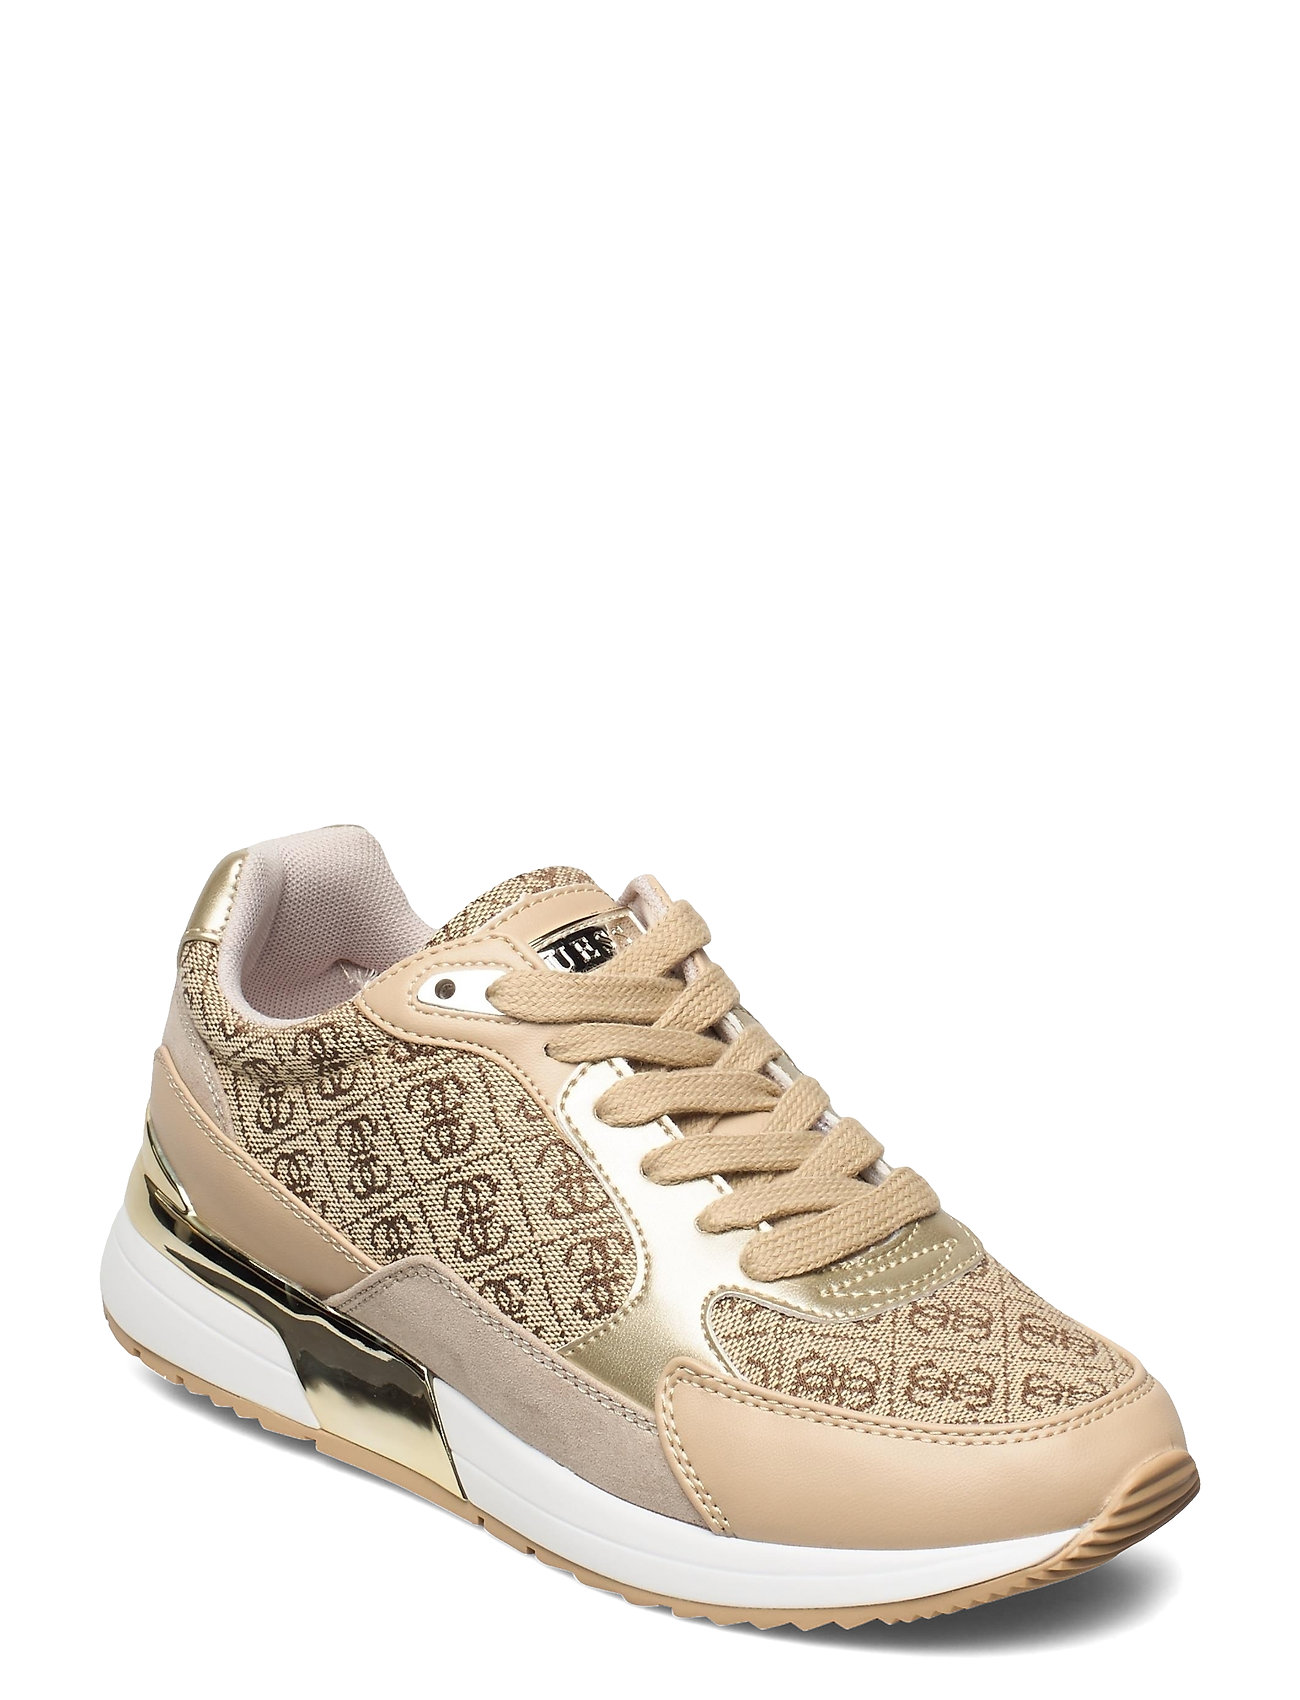 Moxea4/Active Lady/Fabric Low-top Sneakers Guld GUESS sneakers GUESS til dame PLATI Pashion.dk